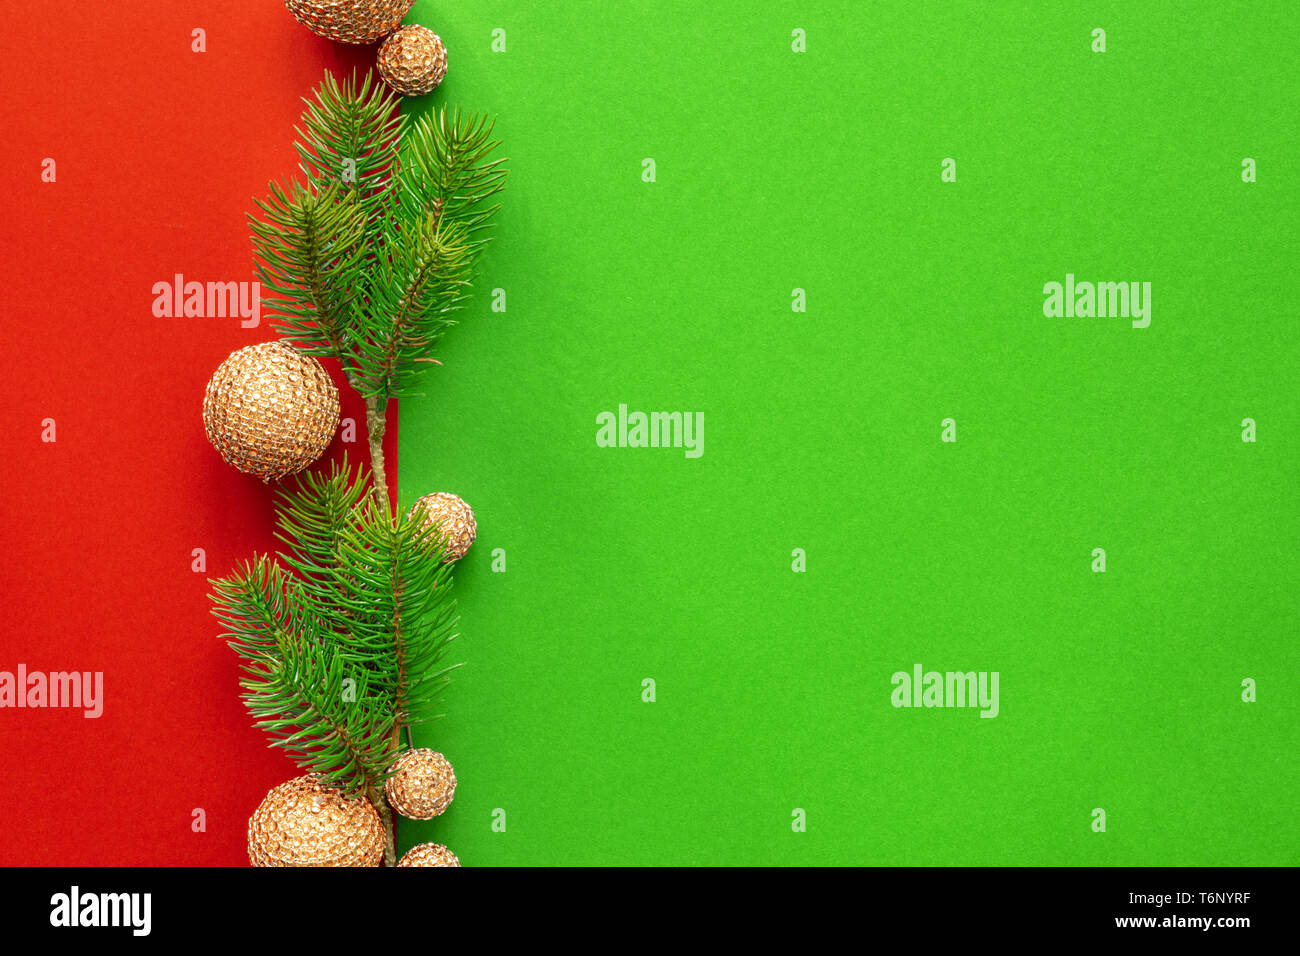 Christmas decoration background with complementary colors Stock Photo